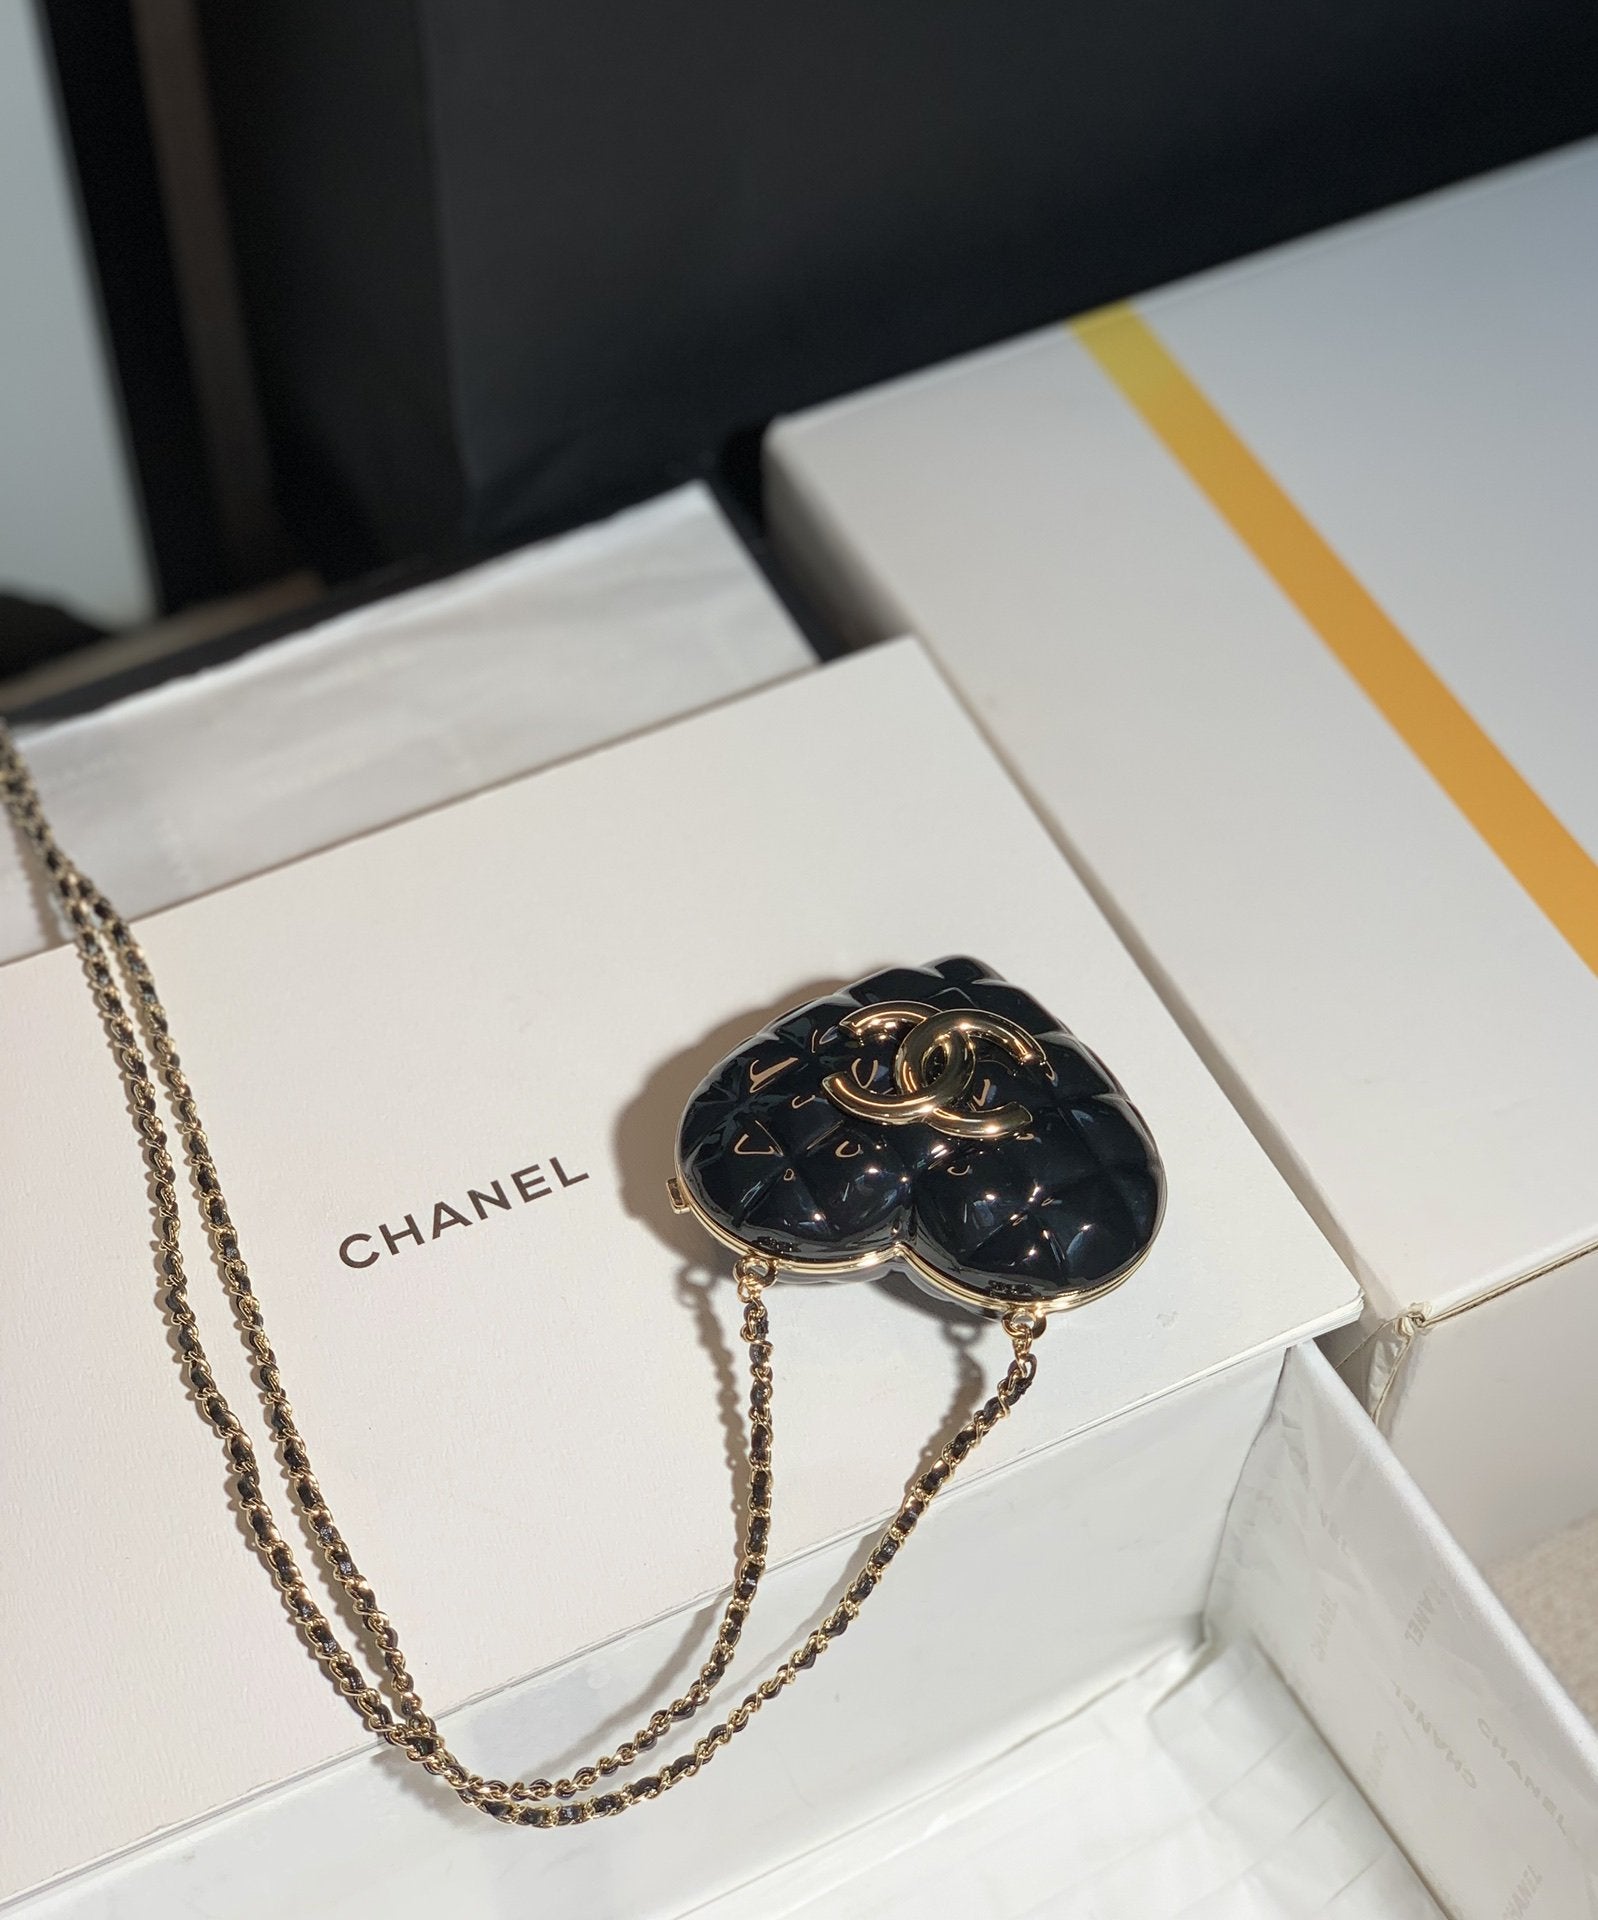 ChanelLong Necklace Bag Black For Women, Women&#8217;s Bags 3in/7.6cm